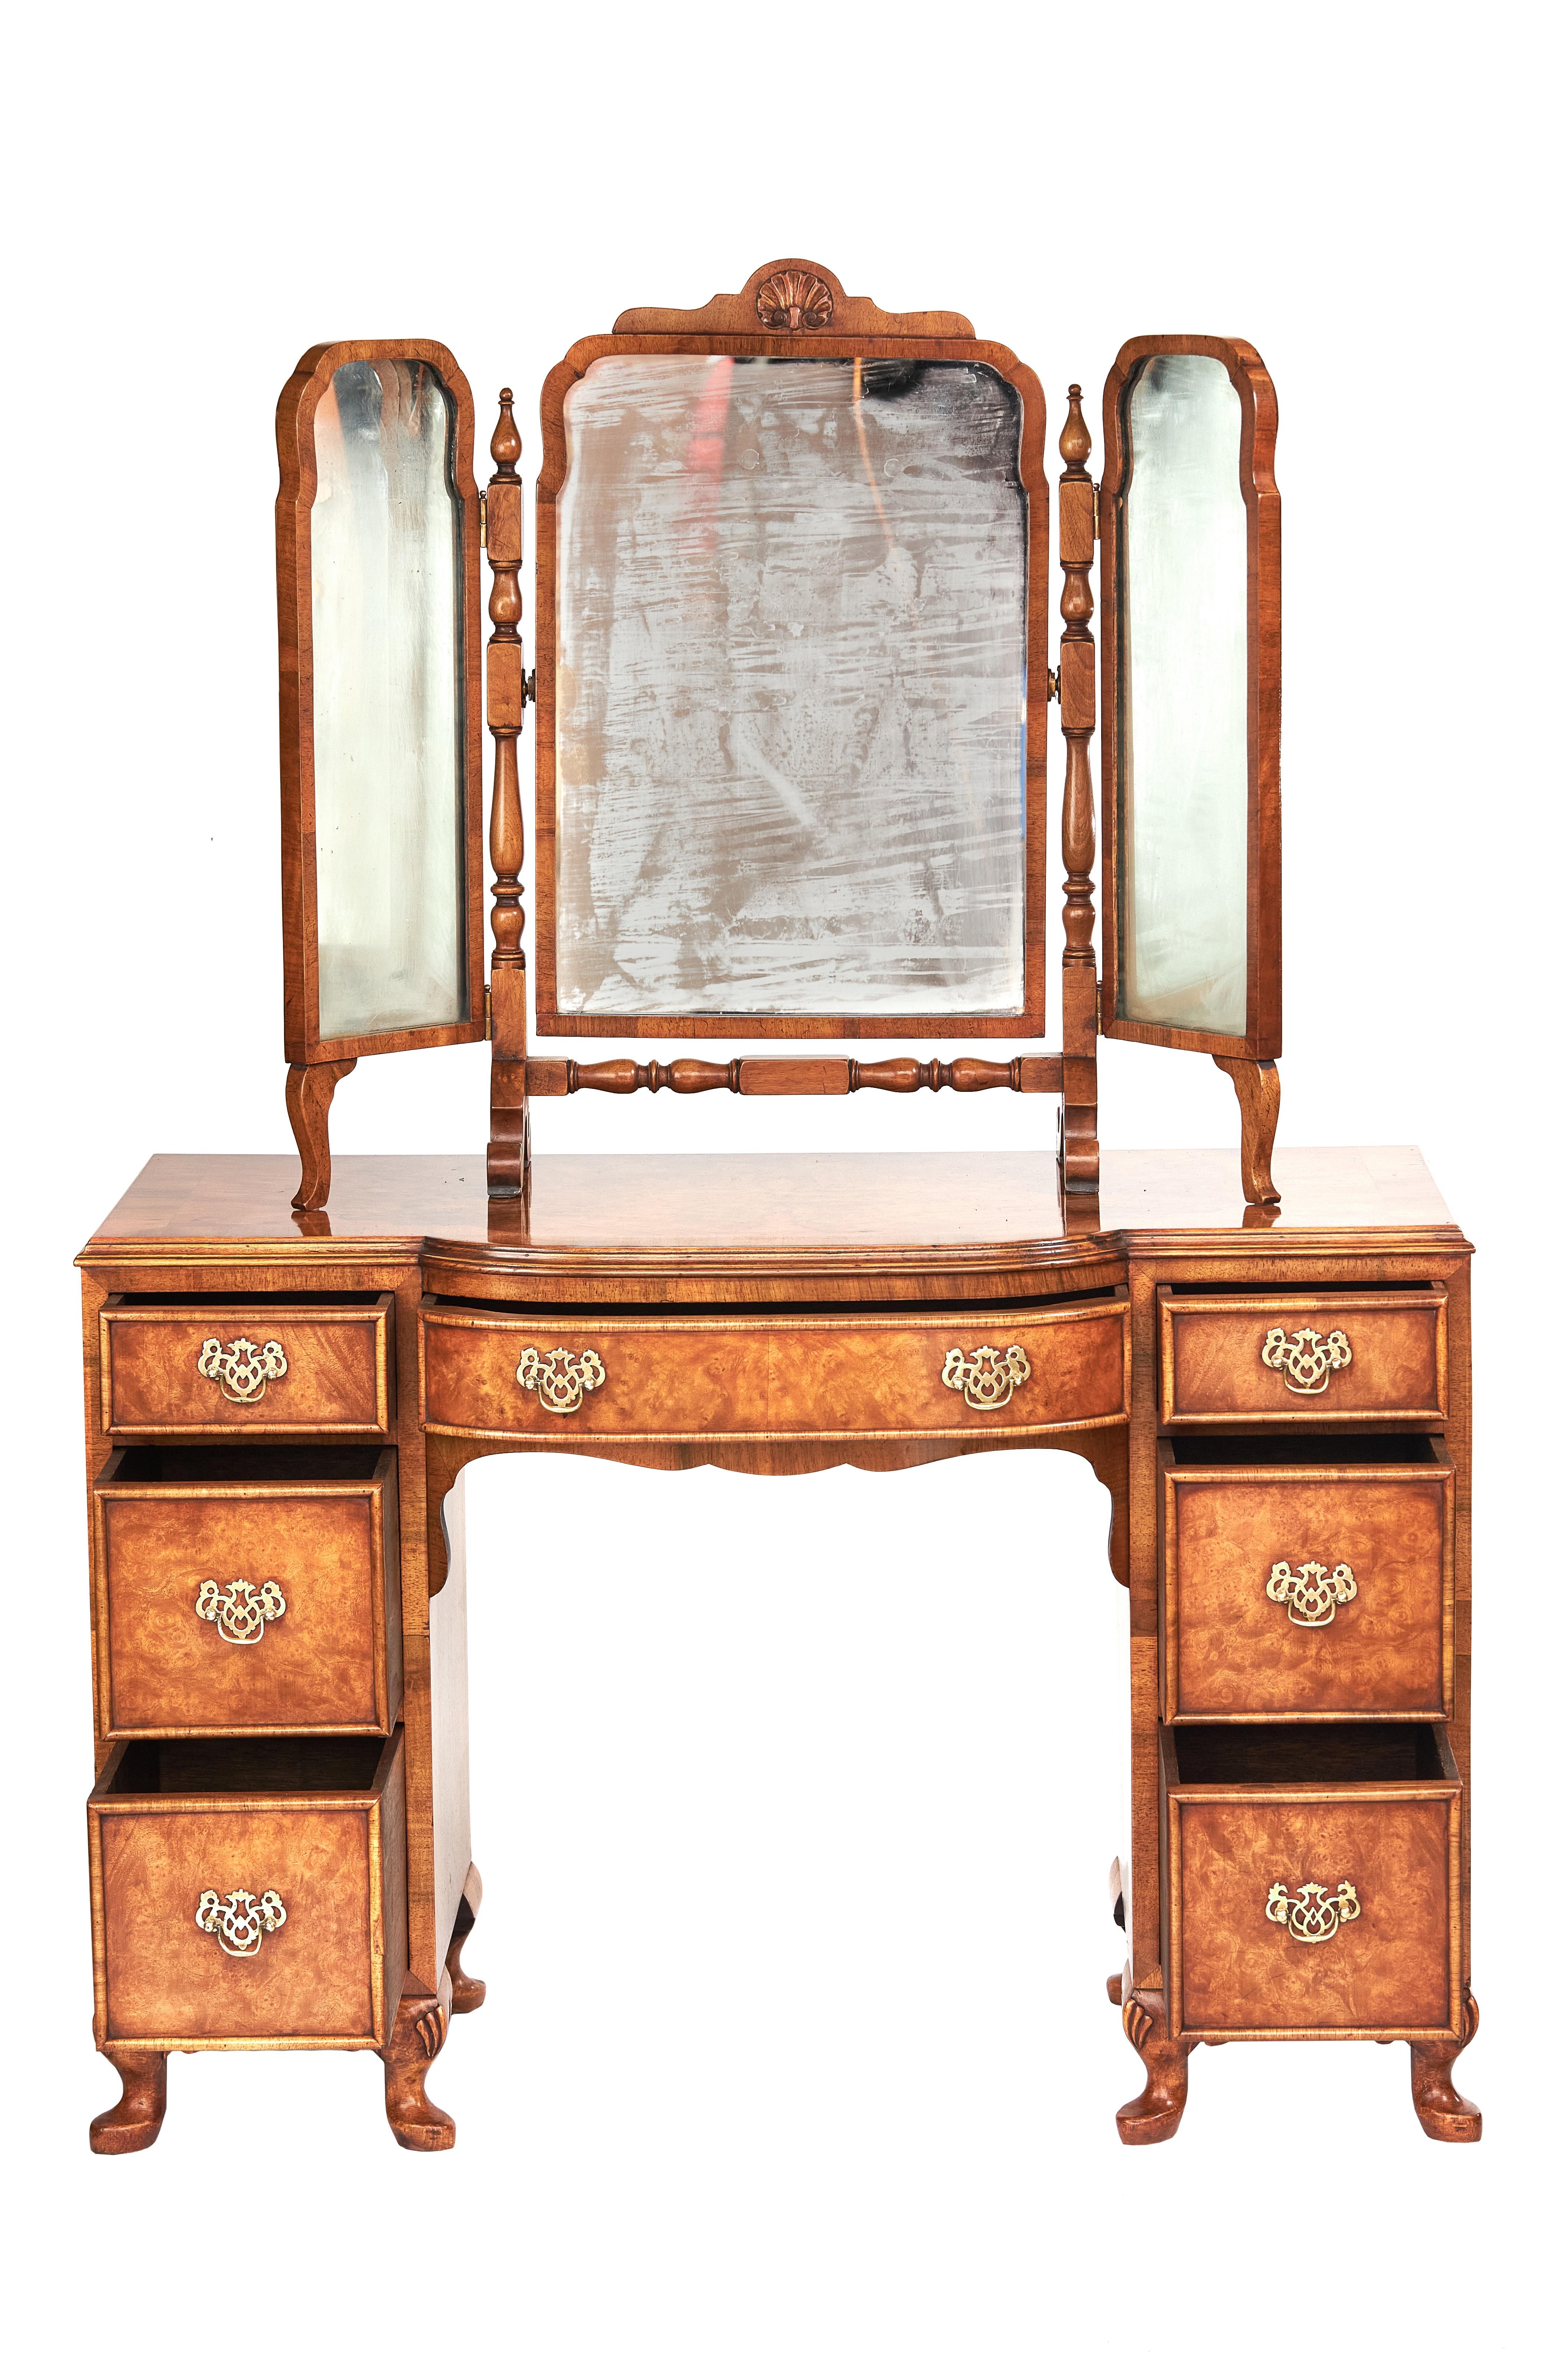 Walnut Queen Anne Style Kneehole Burr Walnut Dressing Table'
With Walnut & Carved Dressing Stool
circa 1930s
The Freestanding Walnut Framed Triple Mirror, With Centre Carved Shell Detail.
Replaced New Mirror Glasses, misted up in pictures
Kneehole